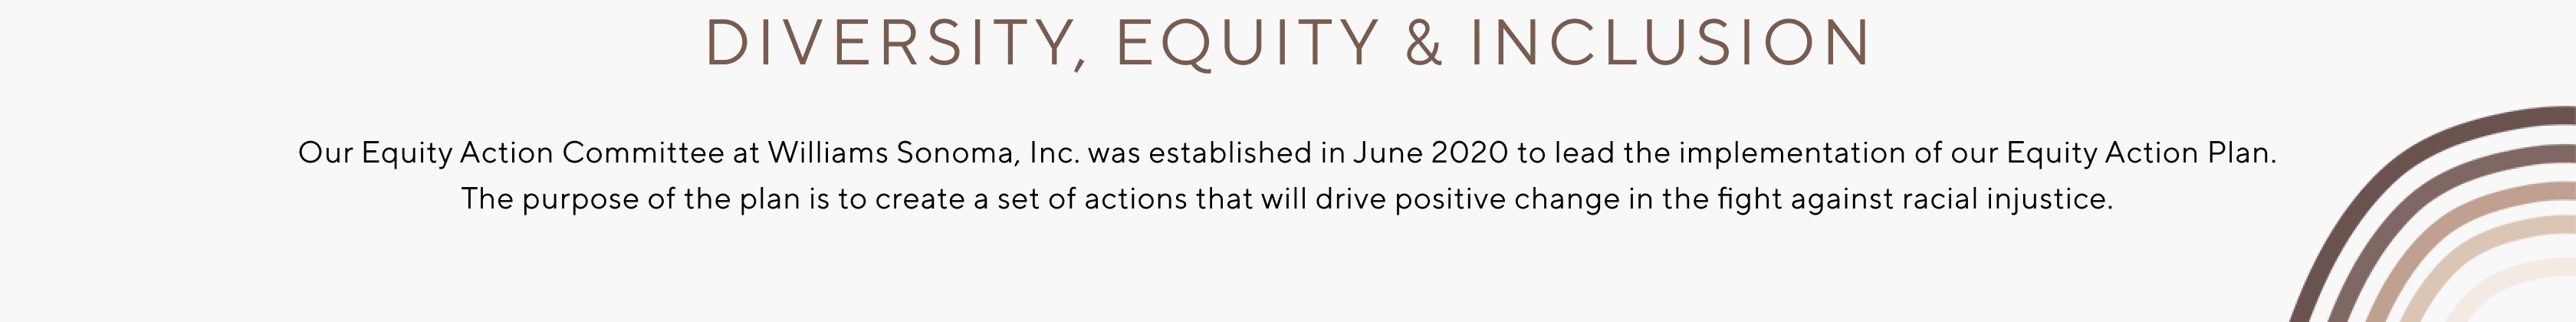 Diversity, Equality & Inclusion > Our Equity Action Committee at Williams Sonoma Inc. was established in June 2020  to lead the implementation of our Equity Action Plan.  The purpose of this plan is to create a set of actions that will drive positive change in the fight against racial injustice.